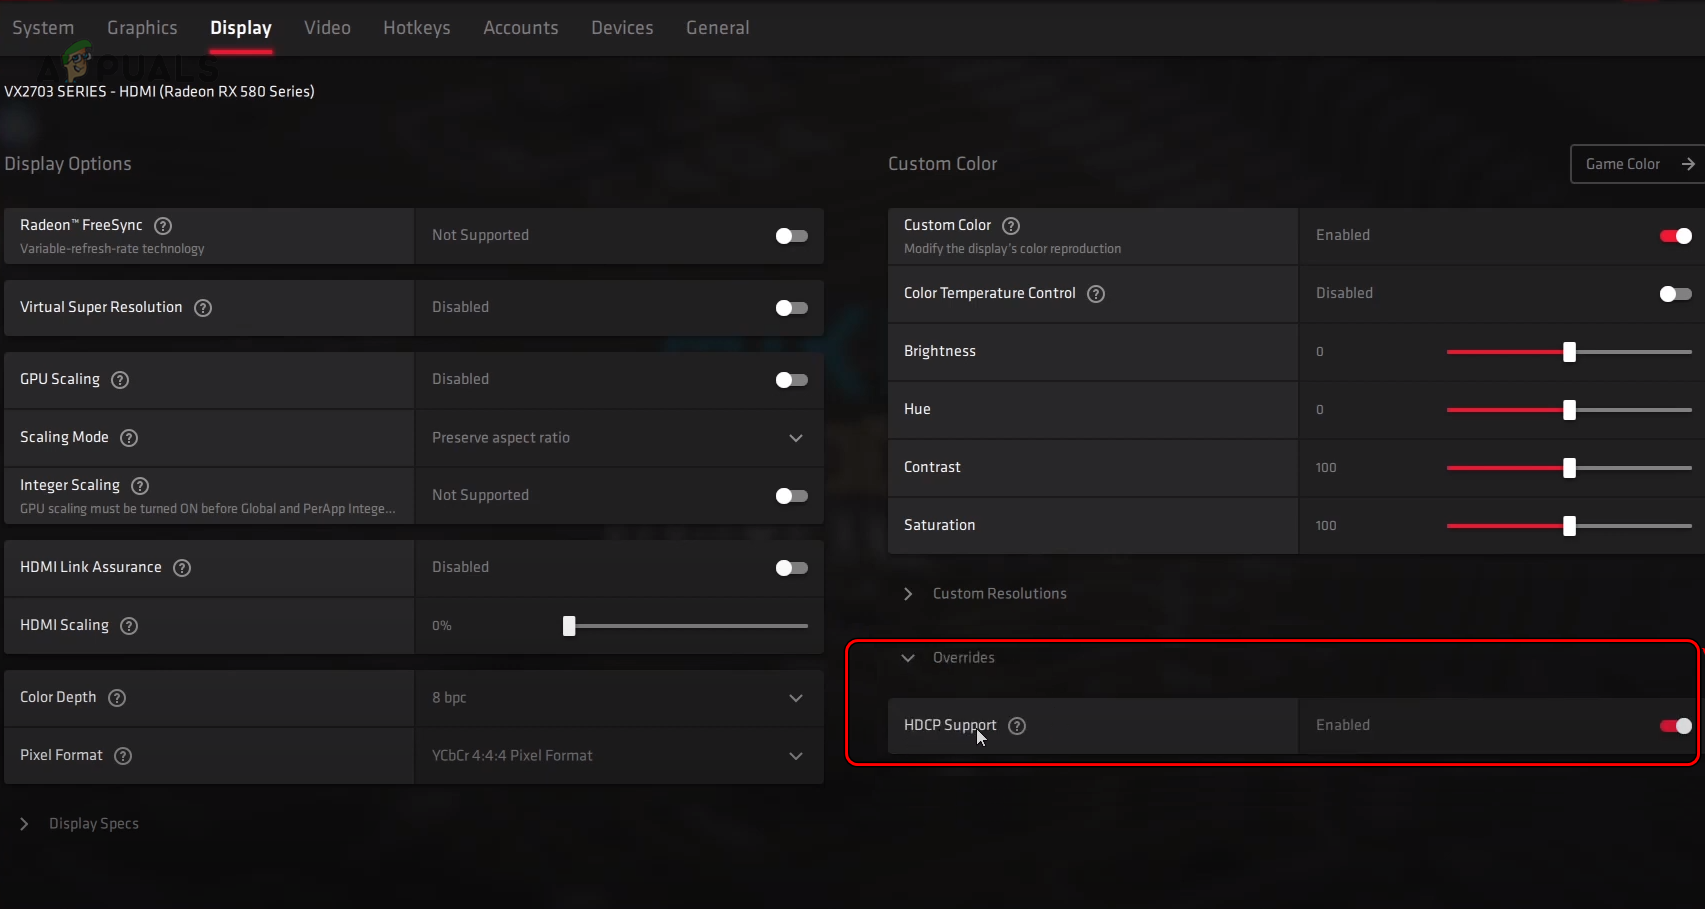 Disable HDCP Support in the AMD Settings